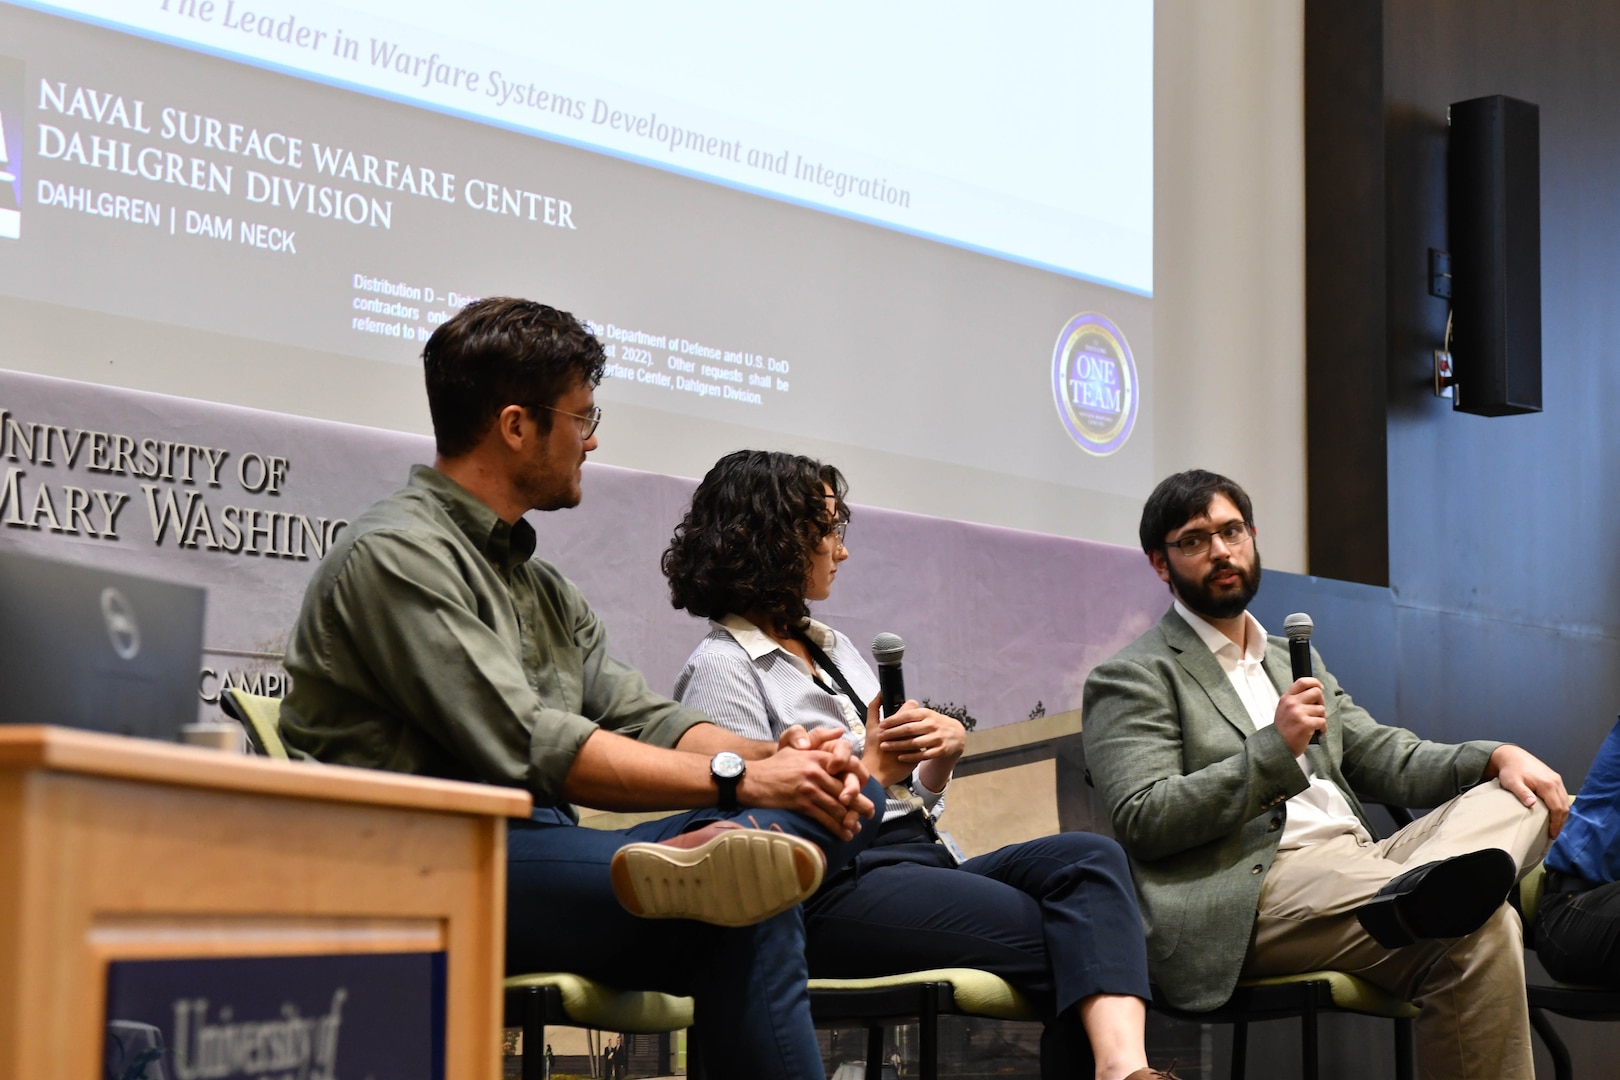 IMAGE: Naval Surface Warfare Center Dahlgren Division (NSWCDD) Artificial Intelligence/Machine Learning (AI/ML) engineer Daniel Suma discusses AI/ML at the NSWCDD Community of Interest Modeling and Simulation Summit July 25 at University of Mary Washington’s Dahlgren Campus.